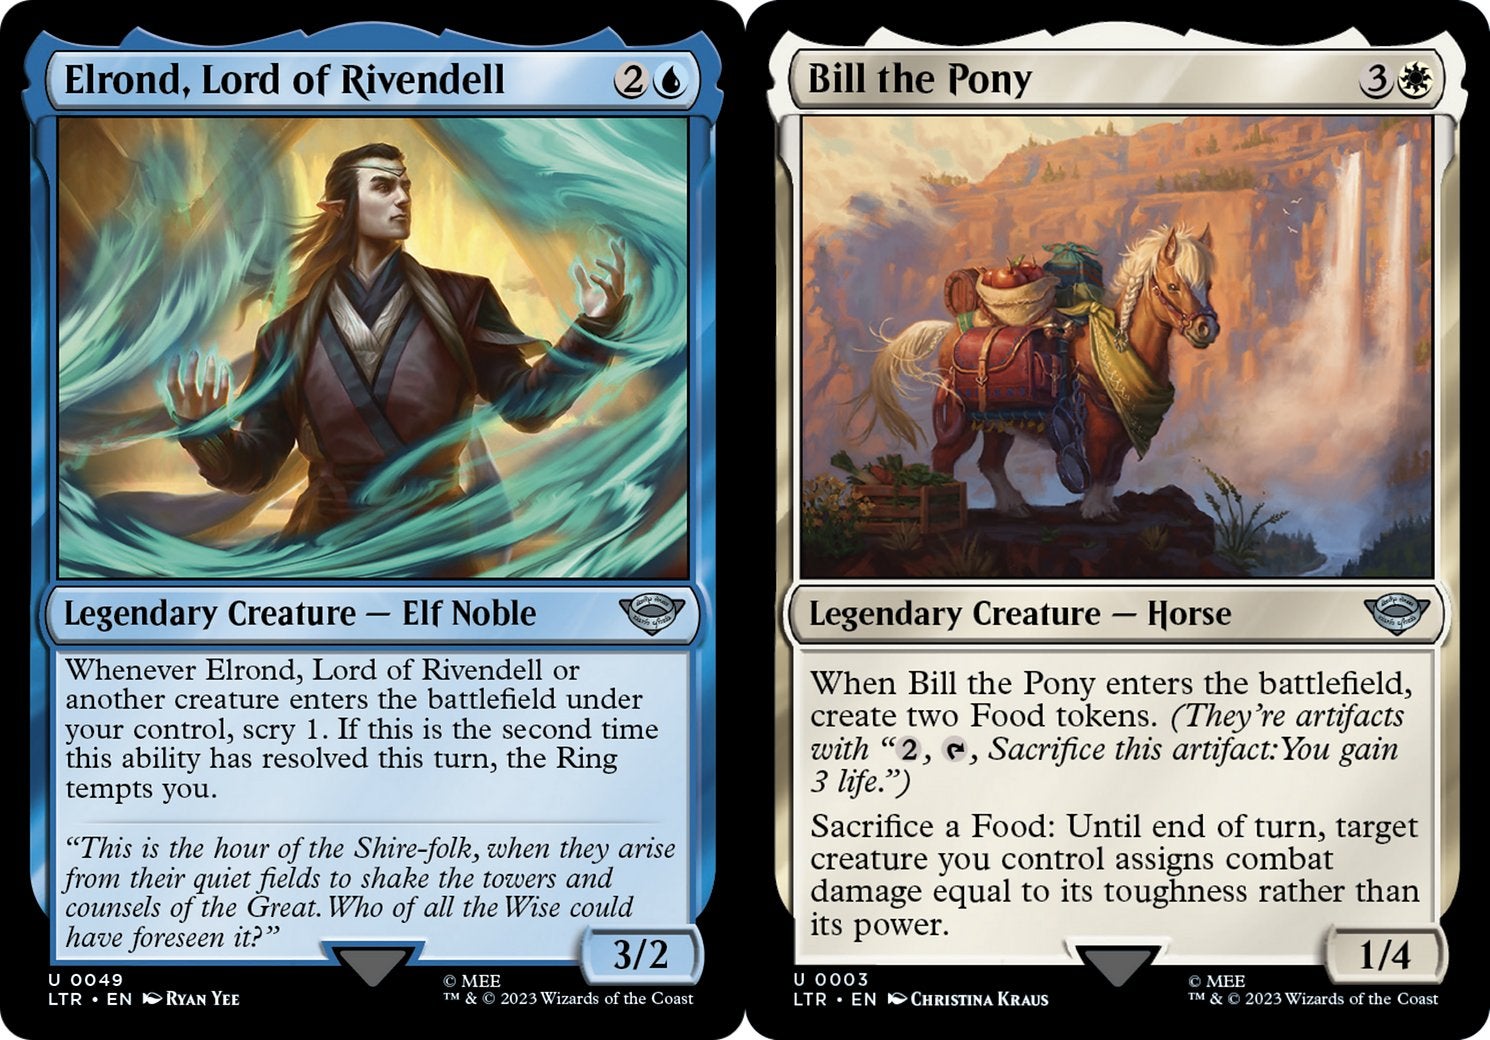 MTG cards depicting Elrond and Bill the Pony from the Lord of the Rings.